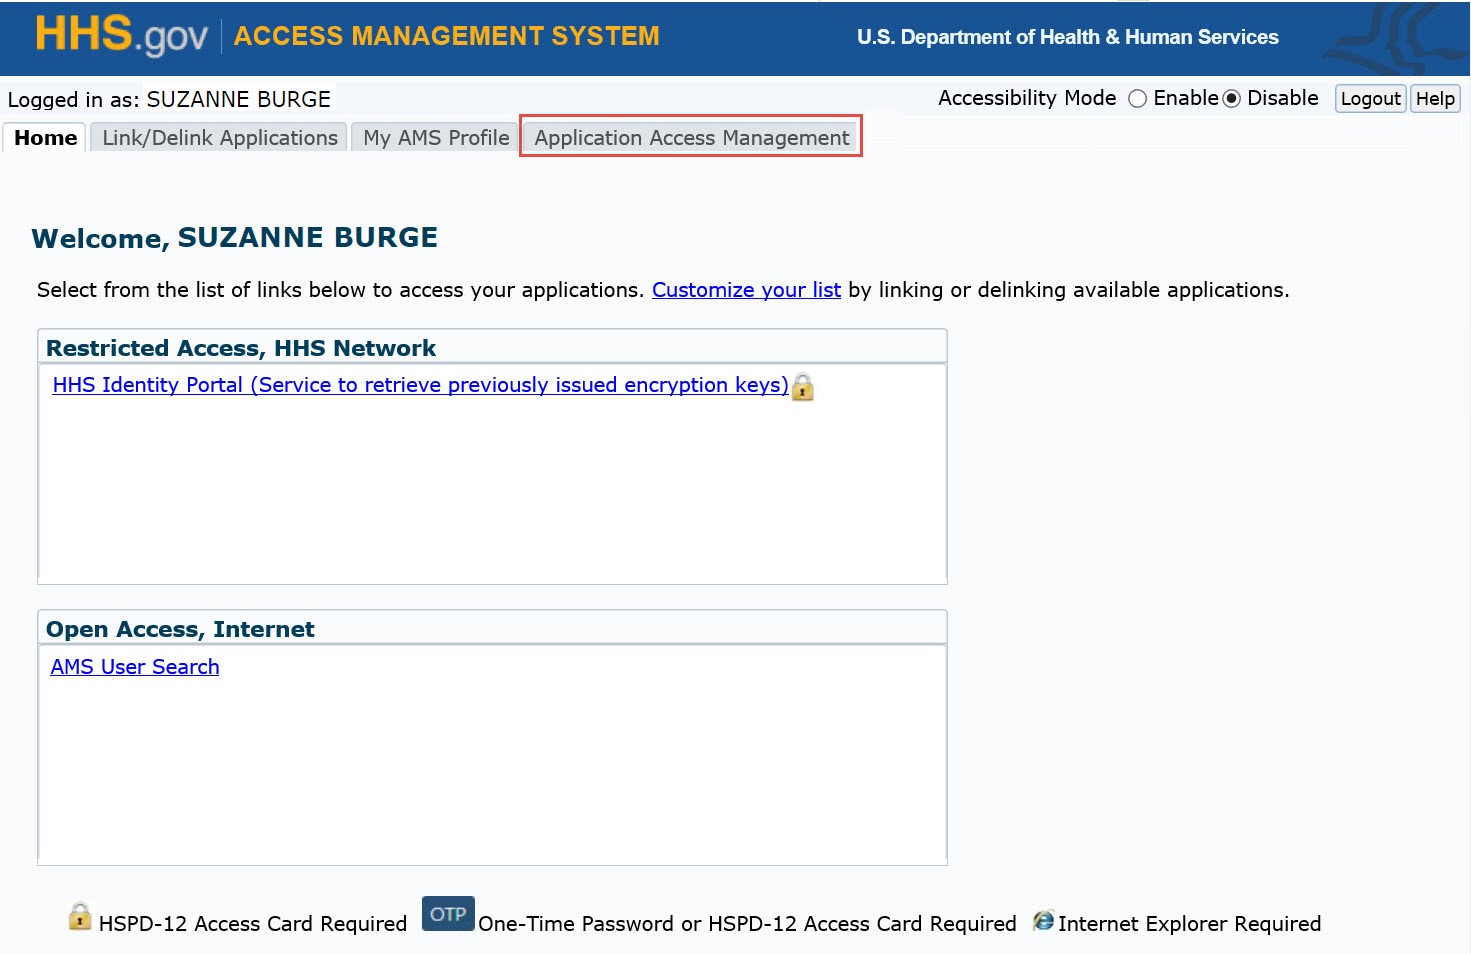 AMS homepage with highlighted application access management tab